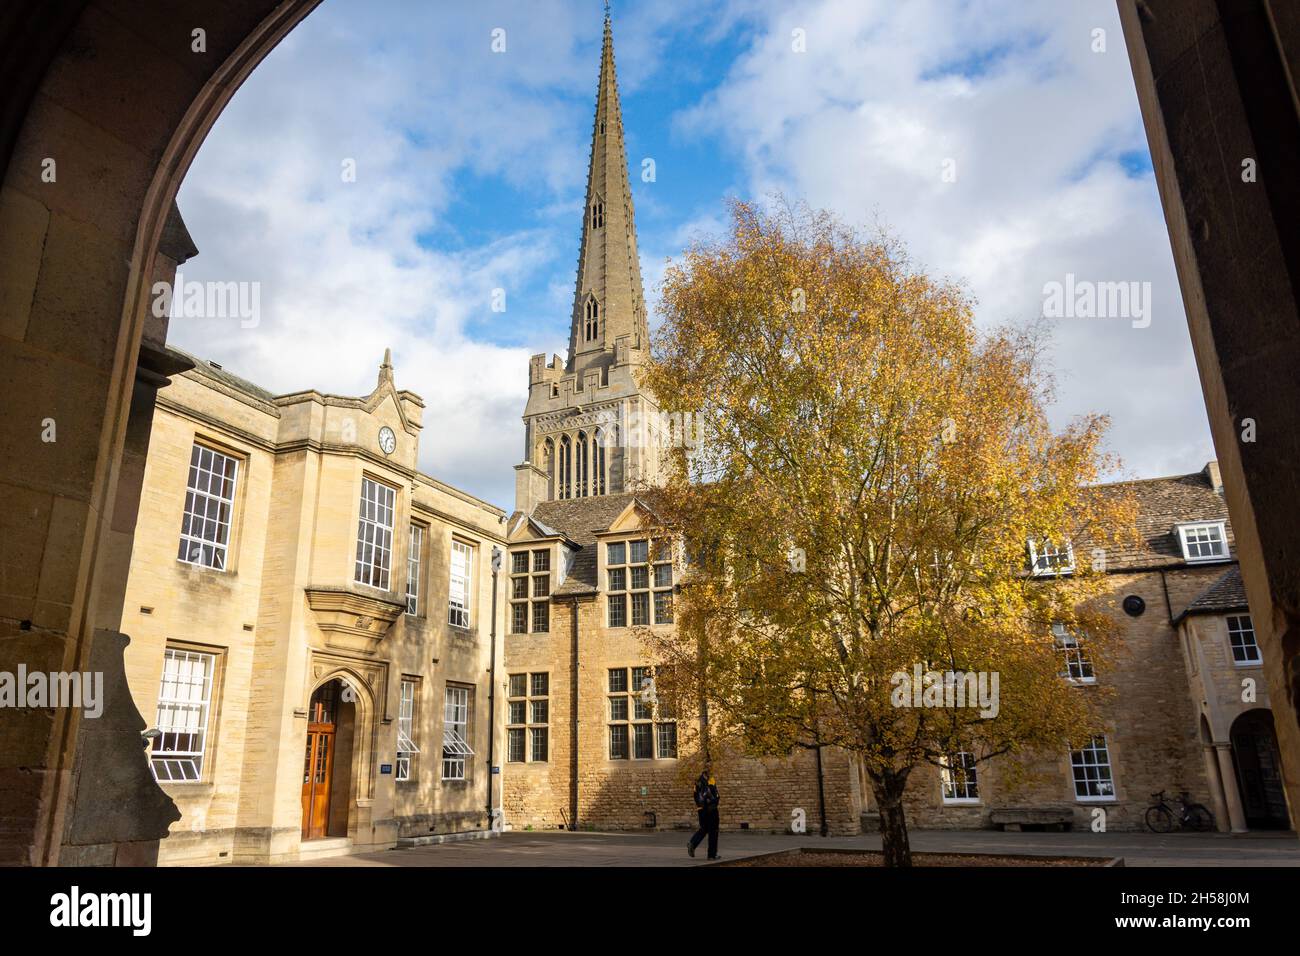 St Peter's Church from Oudle School Cloisters, Oundle, Northamptonshire, England, United Kingdom Stock Photo